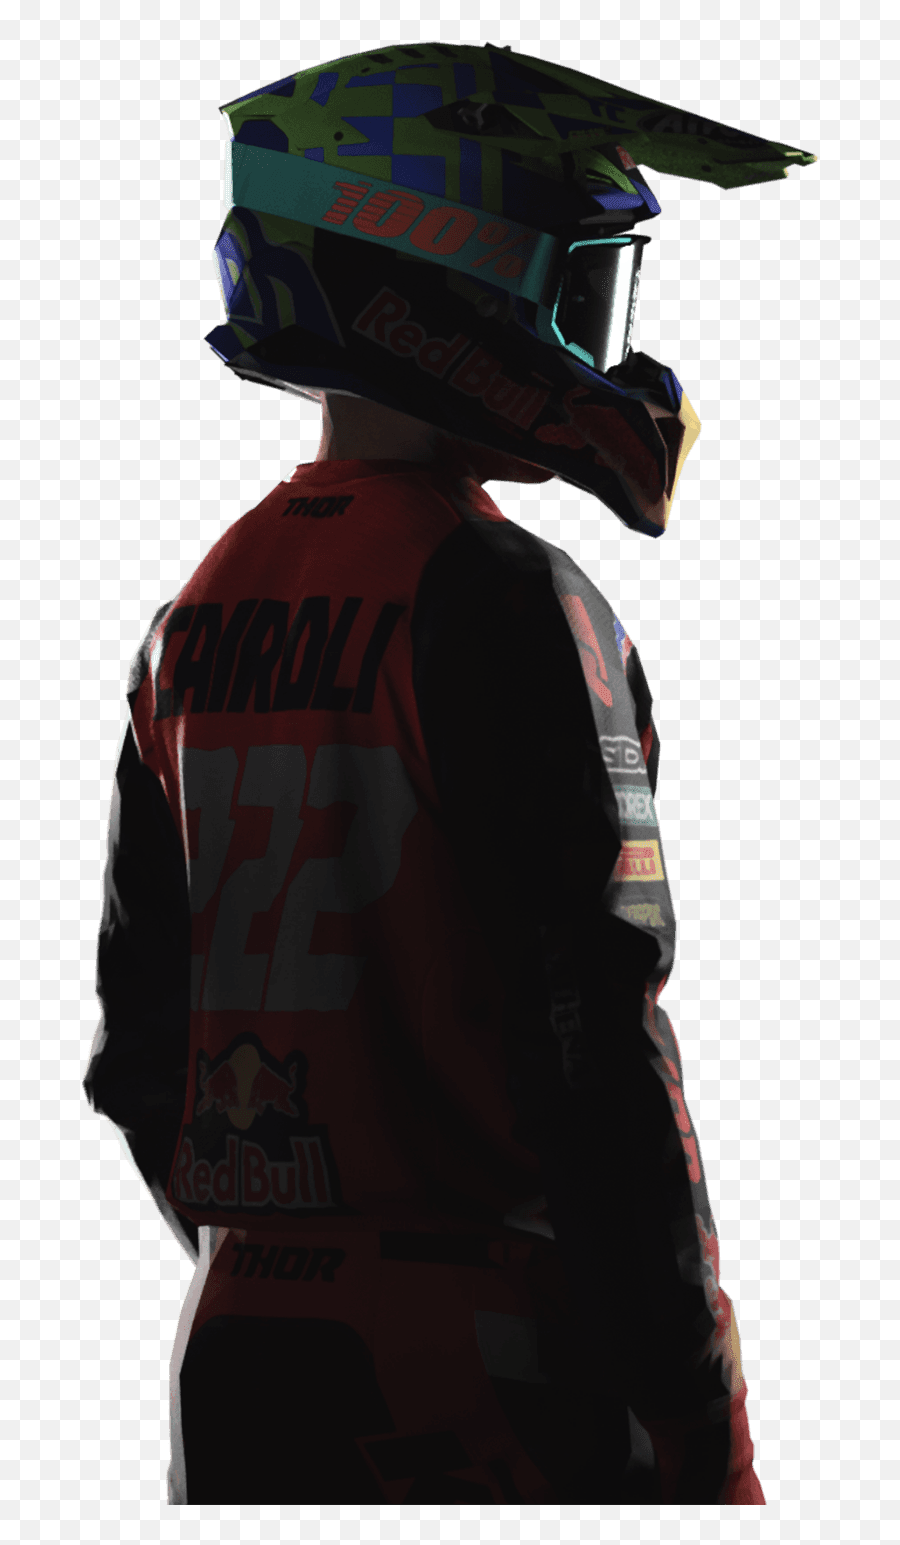 Home - Mxgp 2021 Emoji,Illustration Of Man Running From Yet Clutching His Emotions